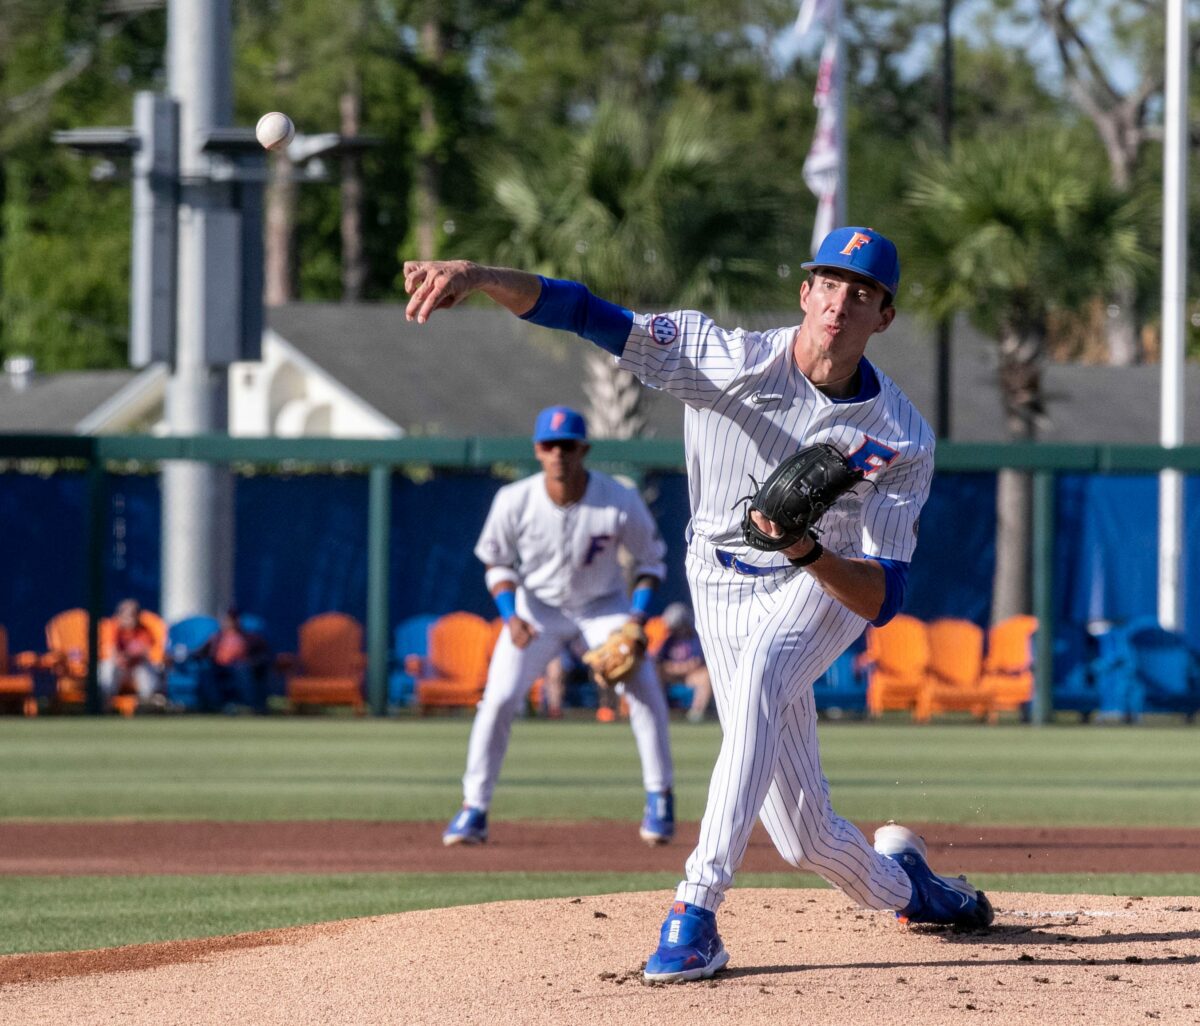 Game Preview: Florida looking to get back on track against UNF